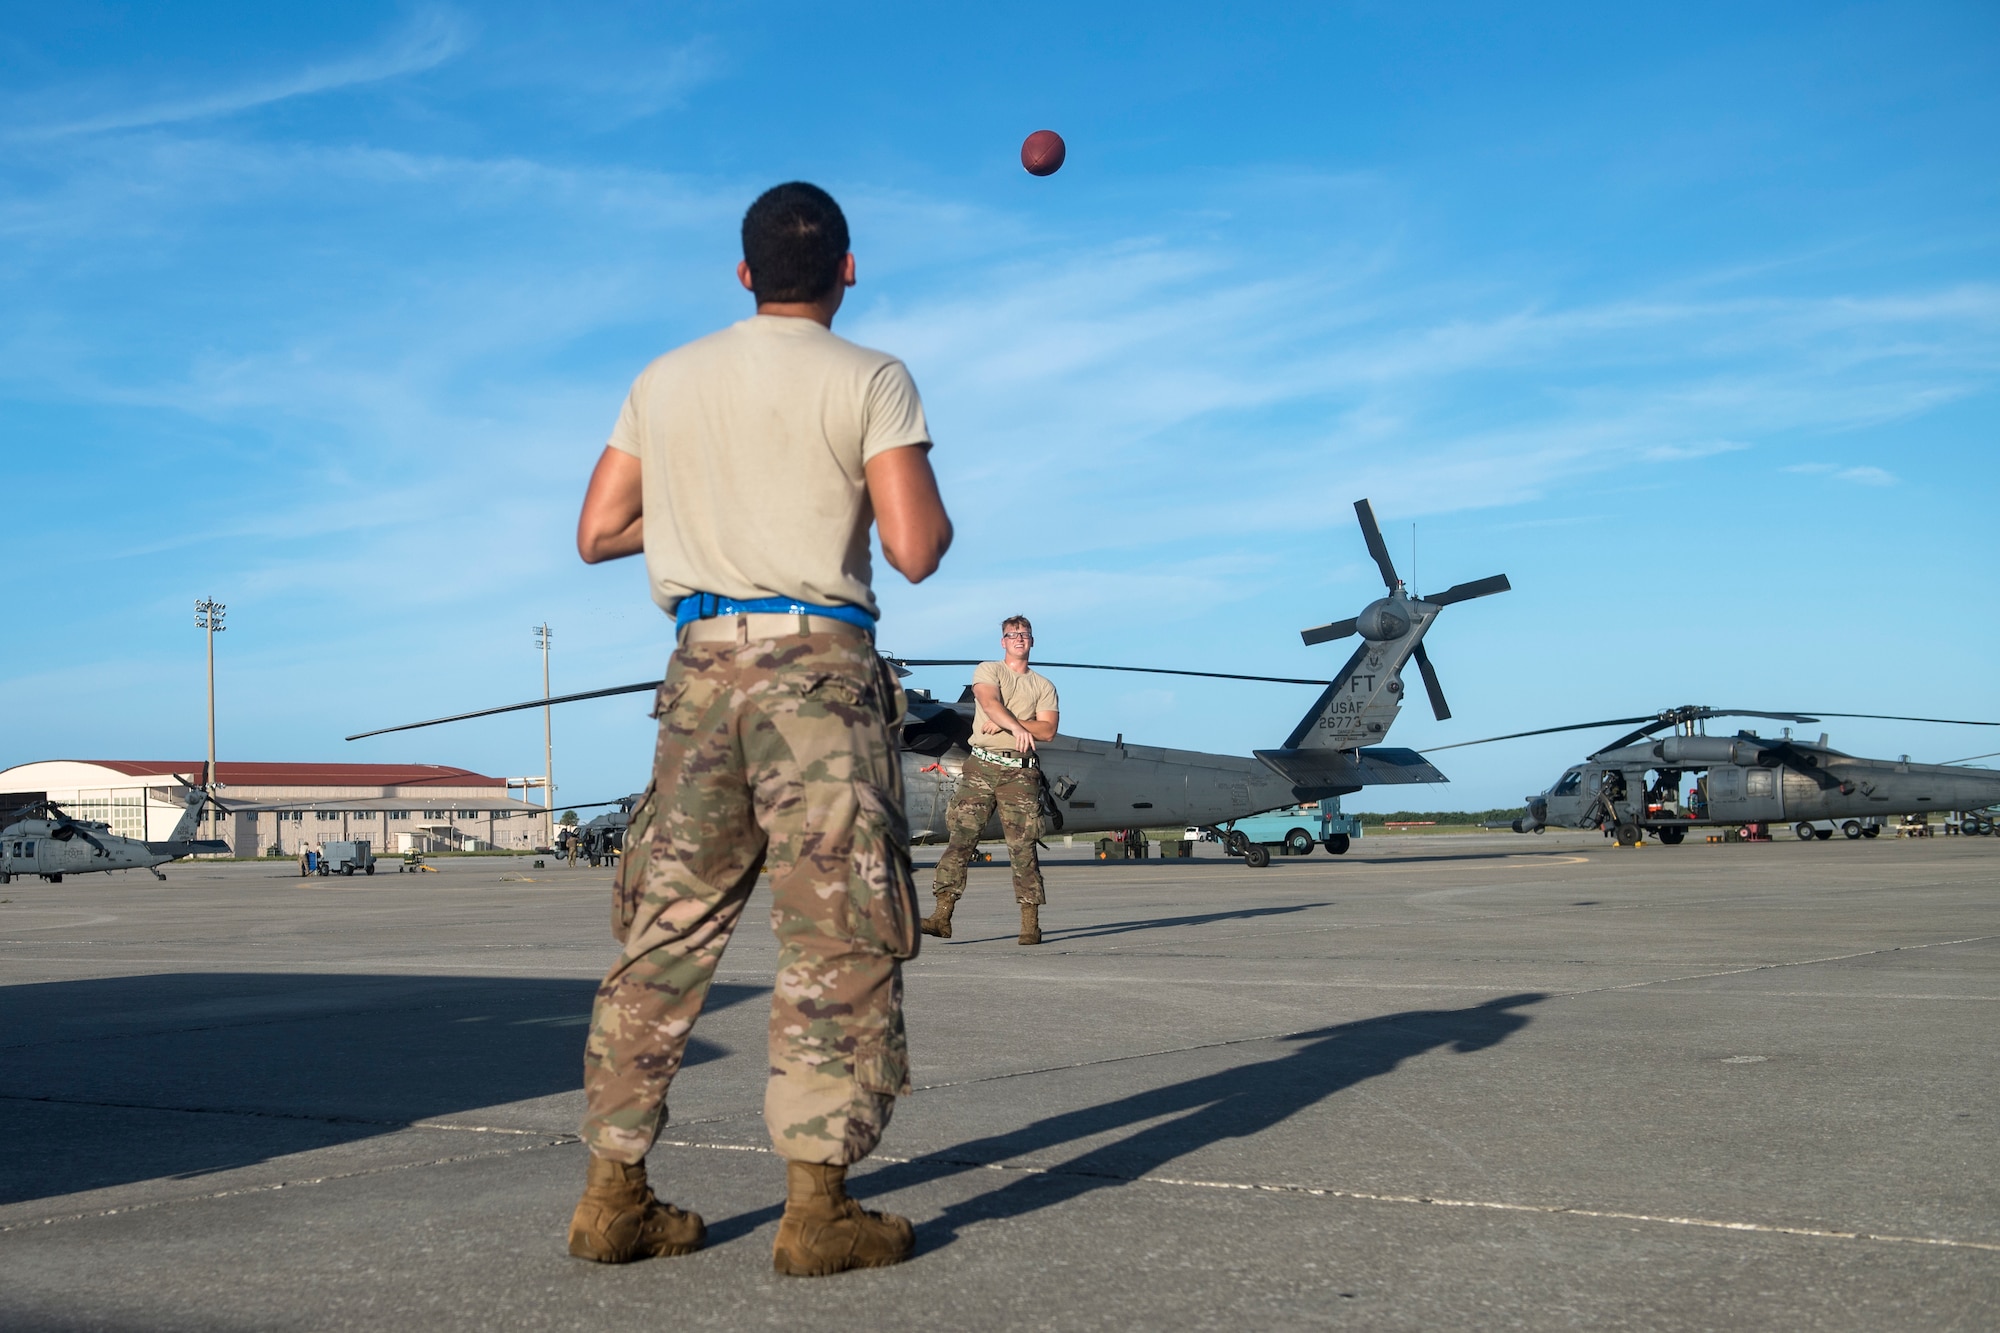 Airmen from the 41st Helicopter Maintenance Unit (HMU) play catch, Aug. 16, 2018, at Patrick Air Force Base, Fla. Airmen from the 41st Rescue Squadron and 41st HMU traveled to Patrick AFB to participate in a spin-up exercise. During the exercise, Airmen faced scenarios and situations they may encounter downrange. (U.S. Air Force photo by Senior Airman Janiqua P. Robinson)